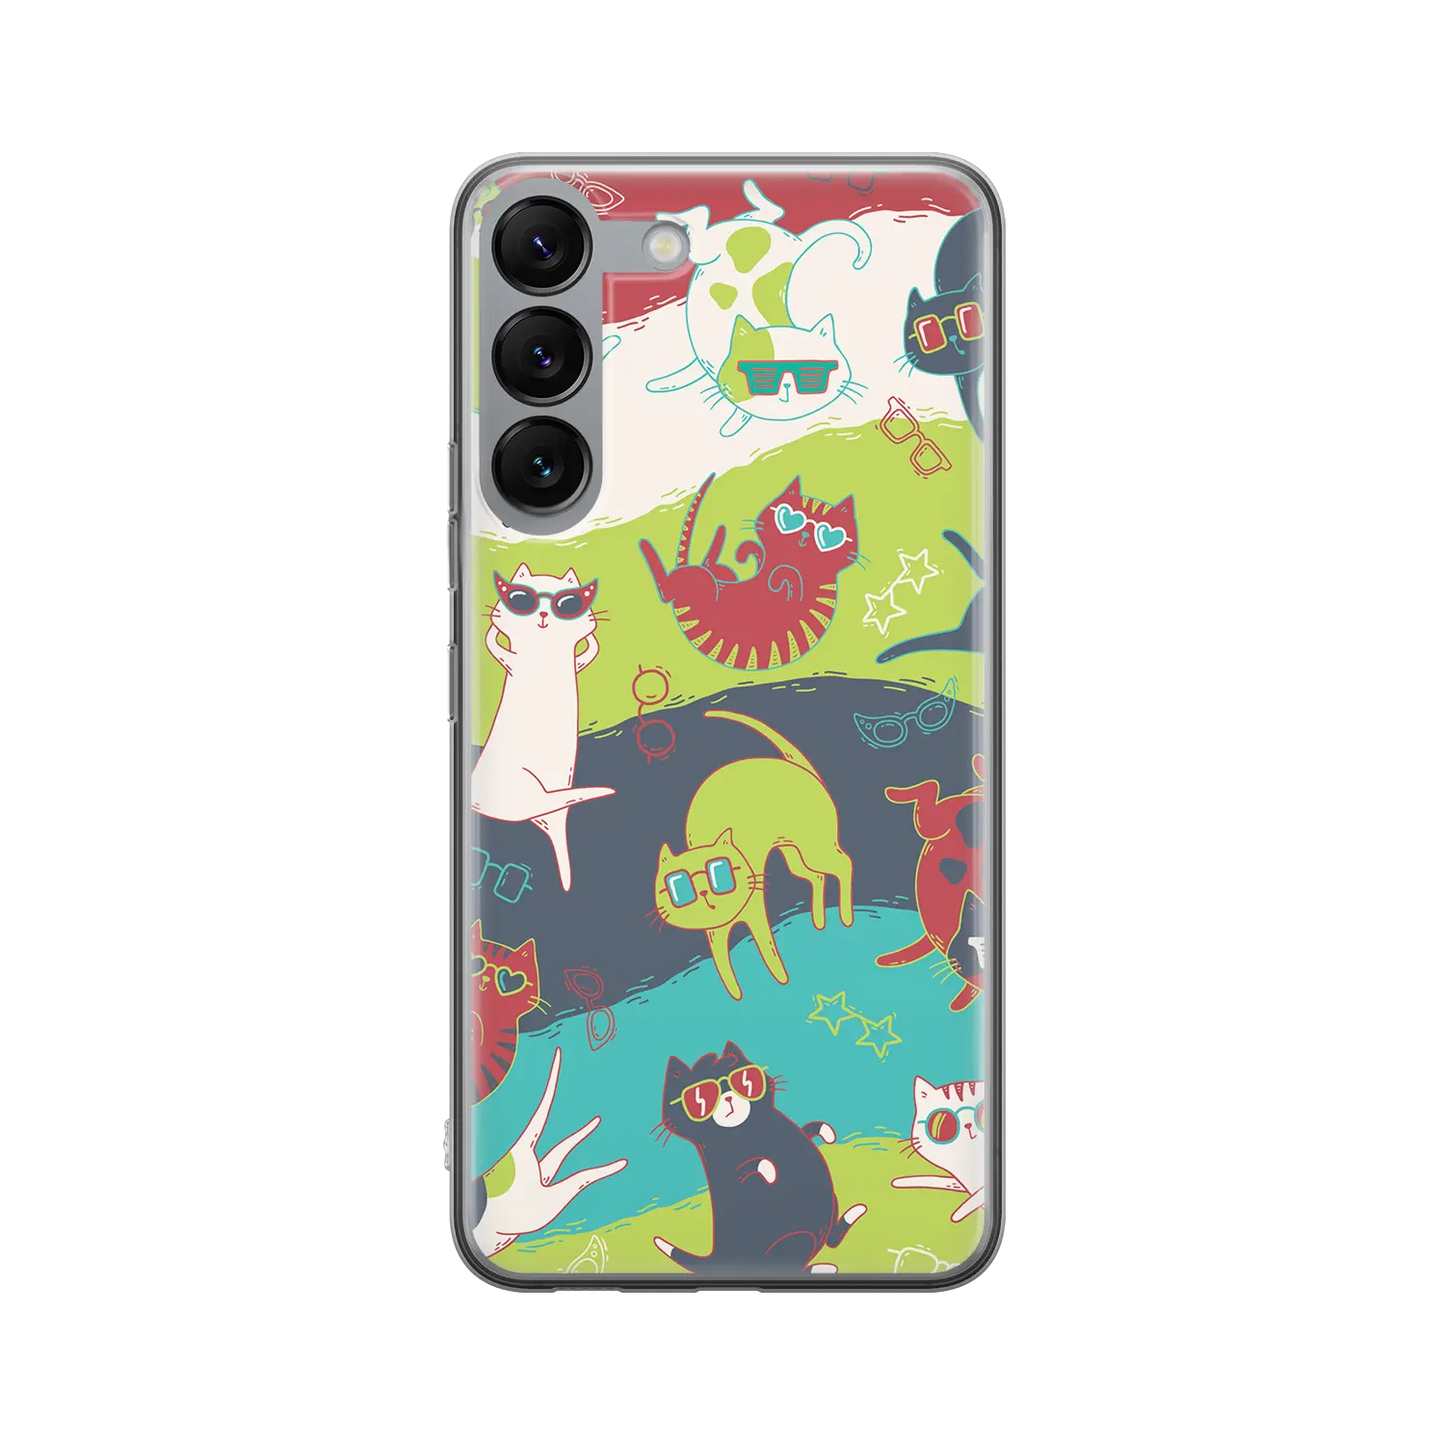 Aristocats - Personalised Galaxy S Case